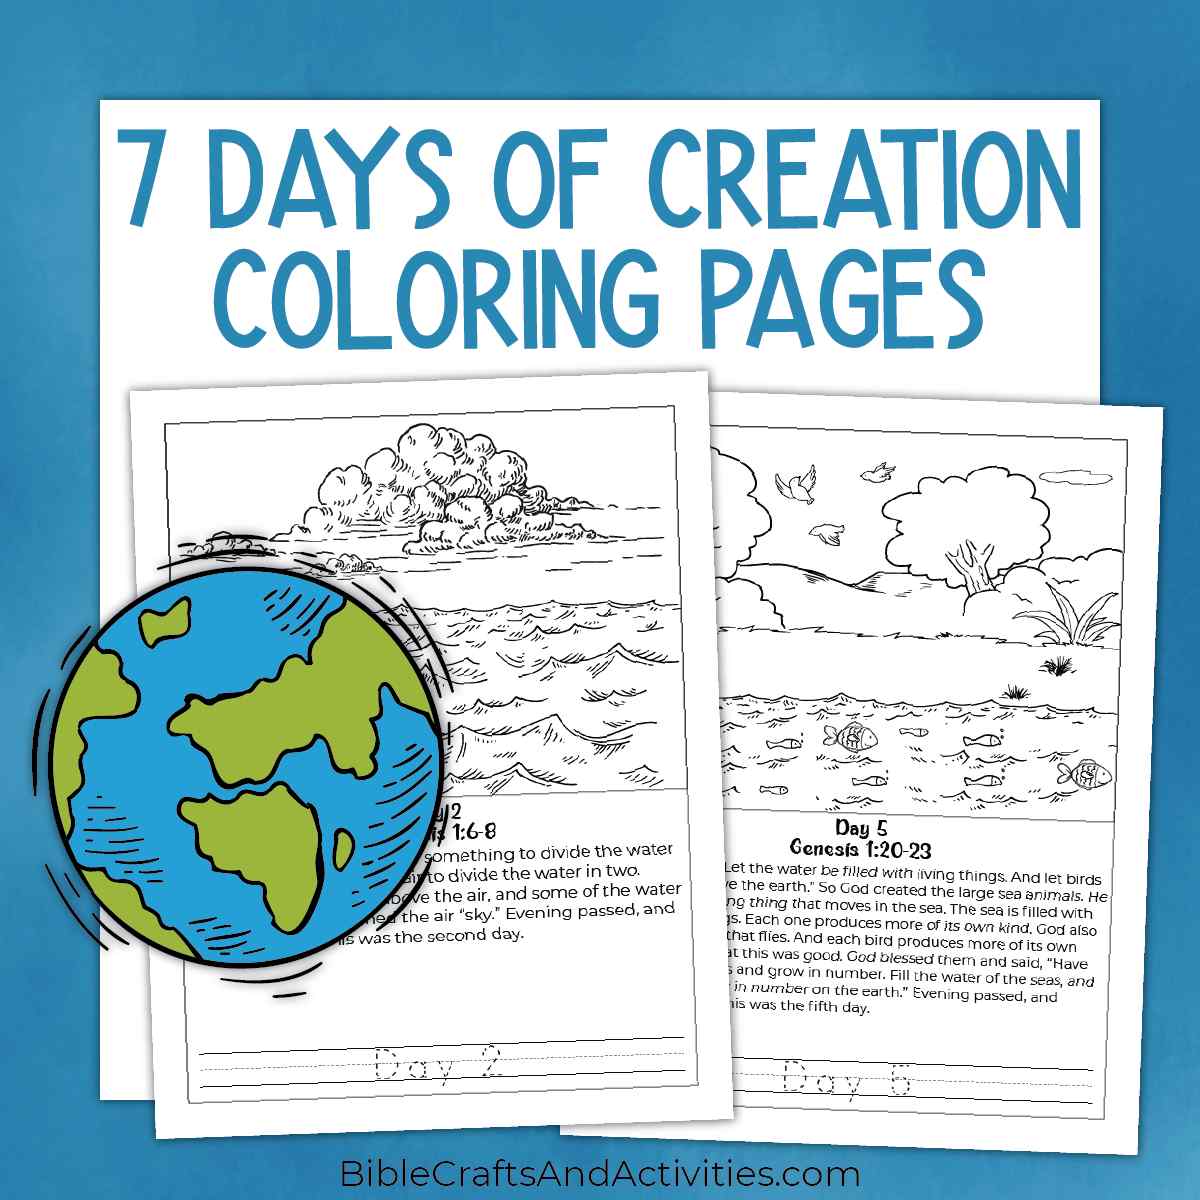 Days of Creation Coloring Pages - Bible Crafts Shop